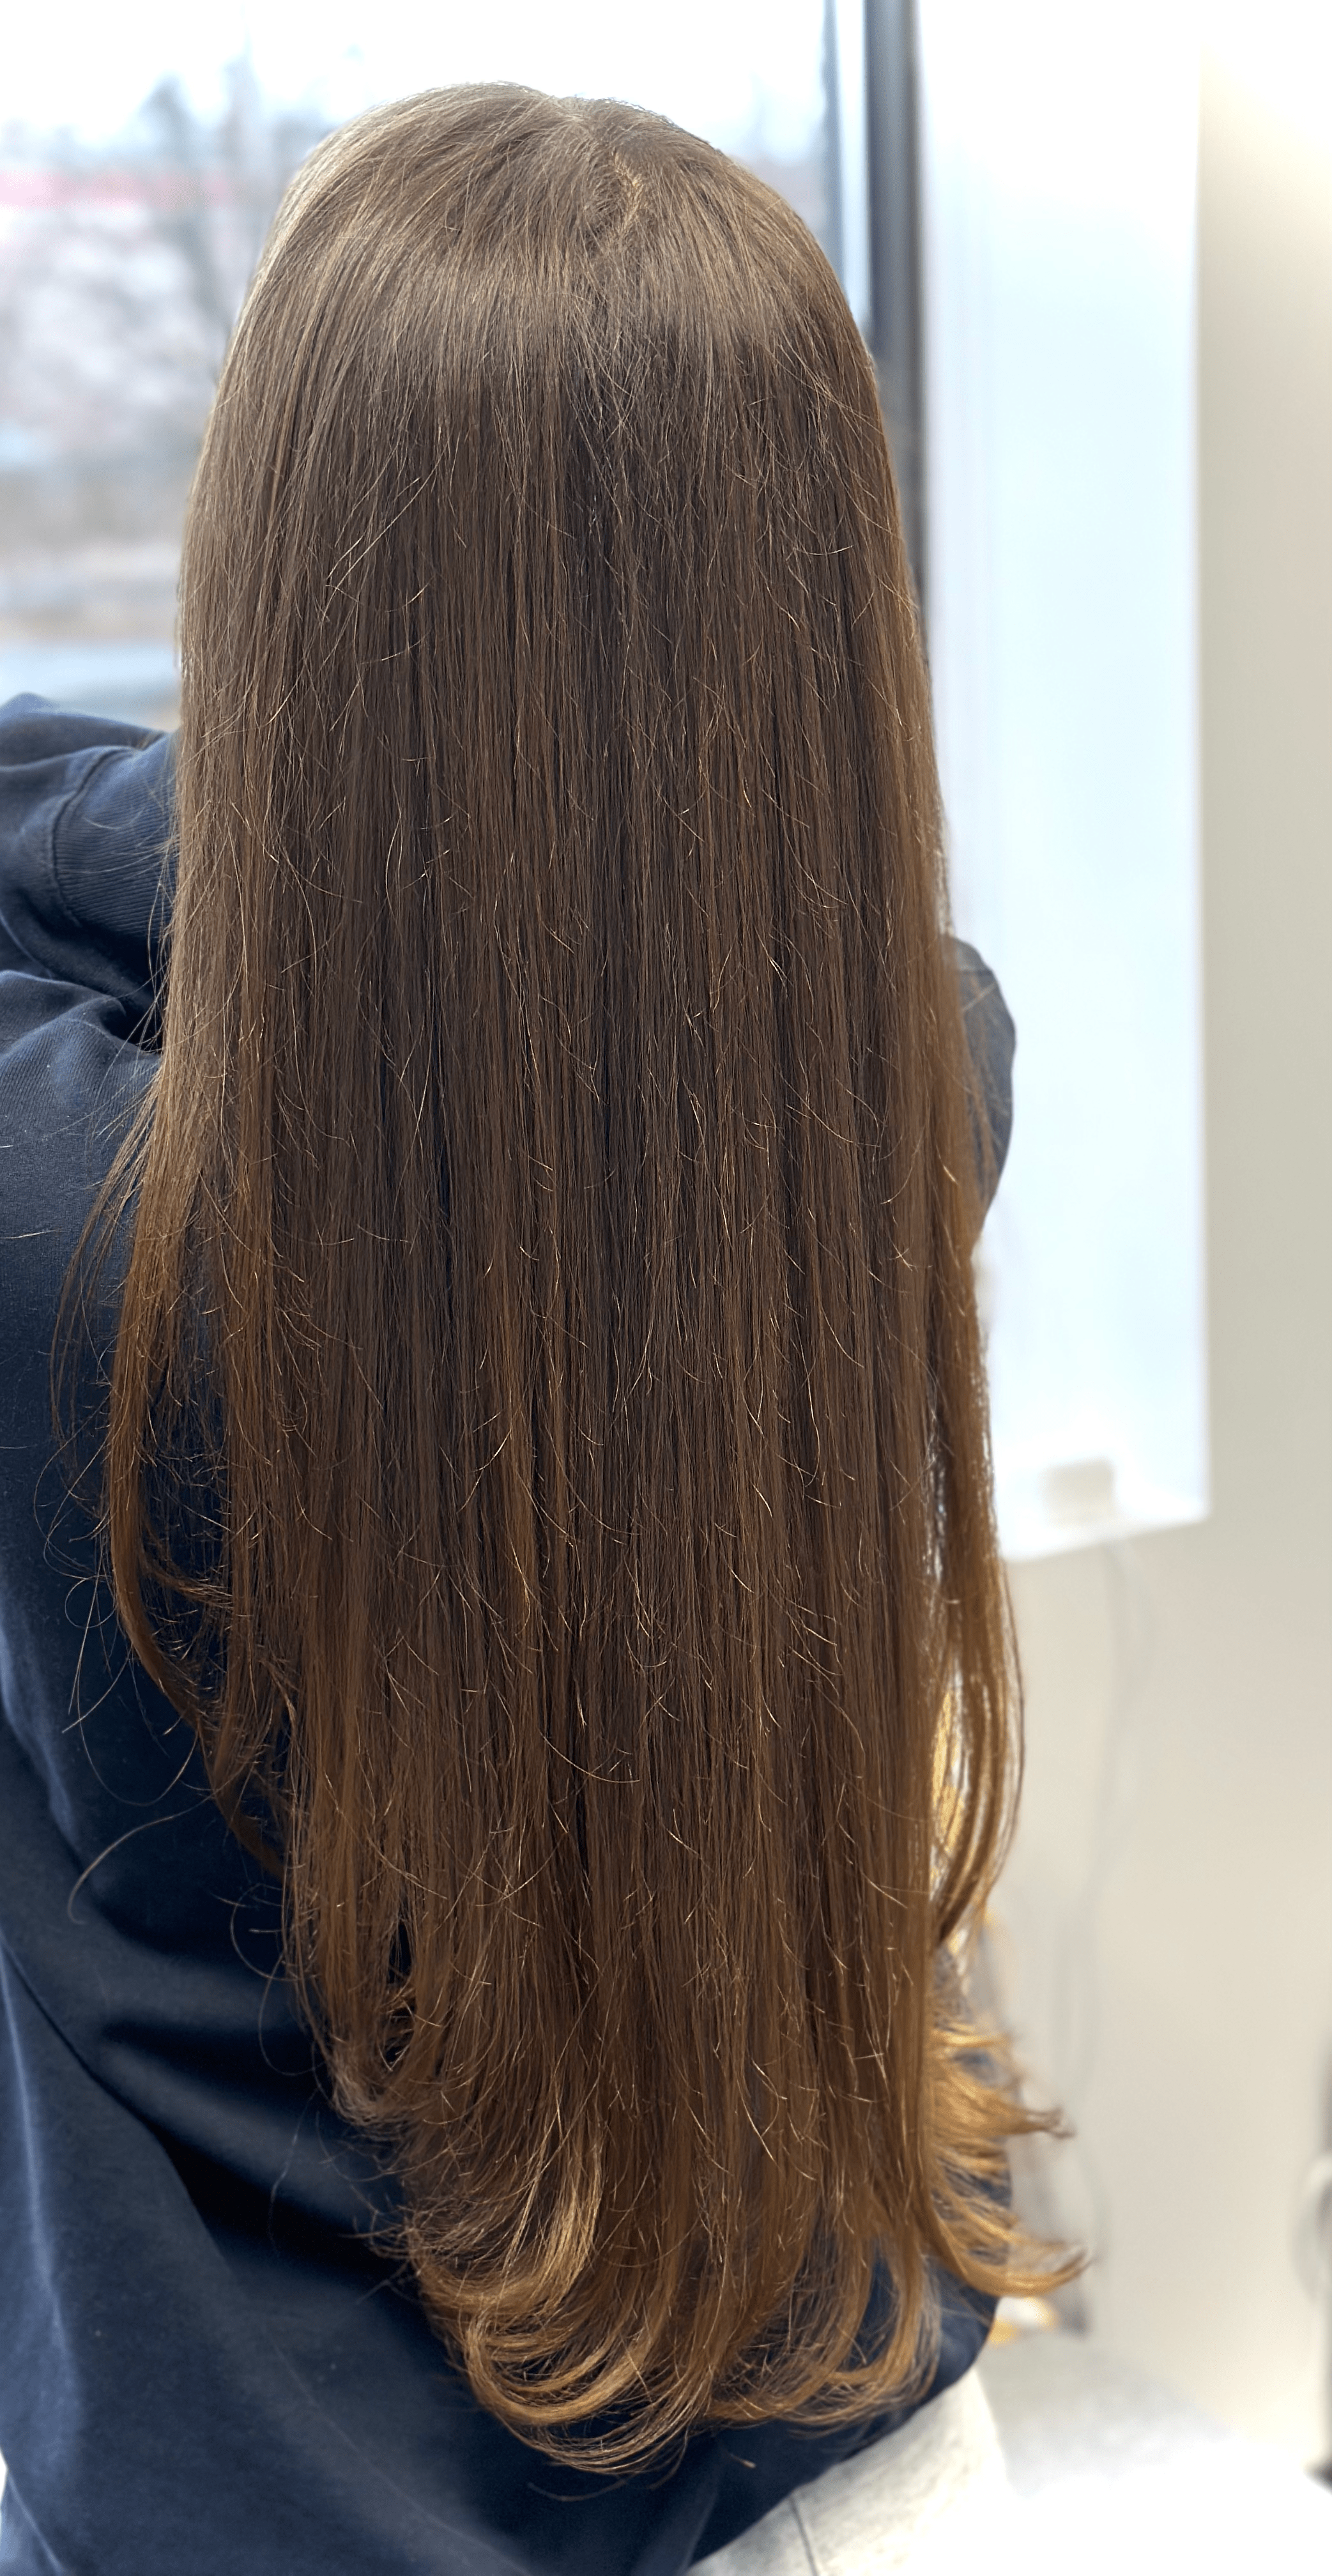 Smoothy and Shiny - Hair By Marianne - Hair Salon Dedham MA